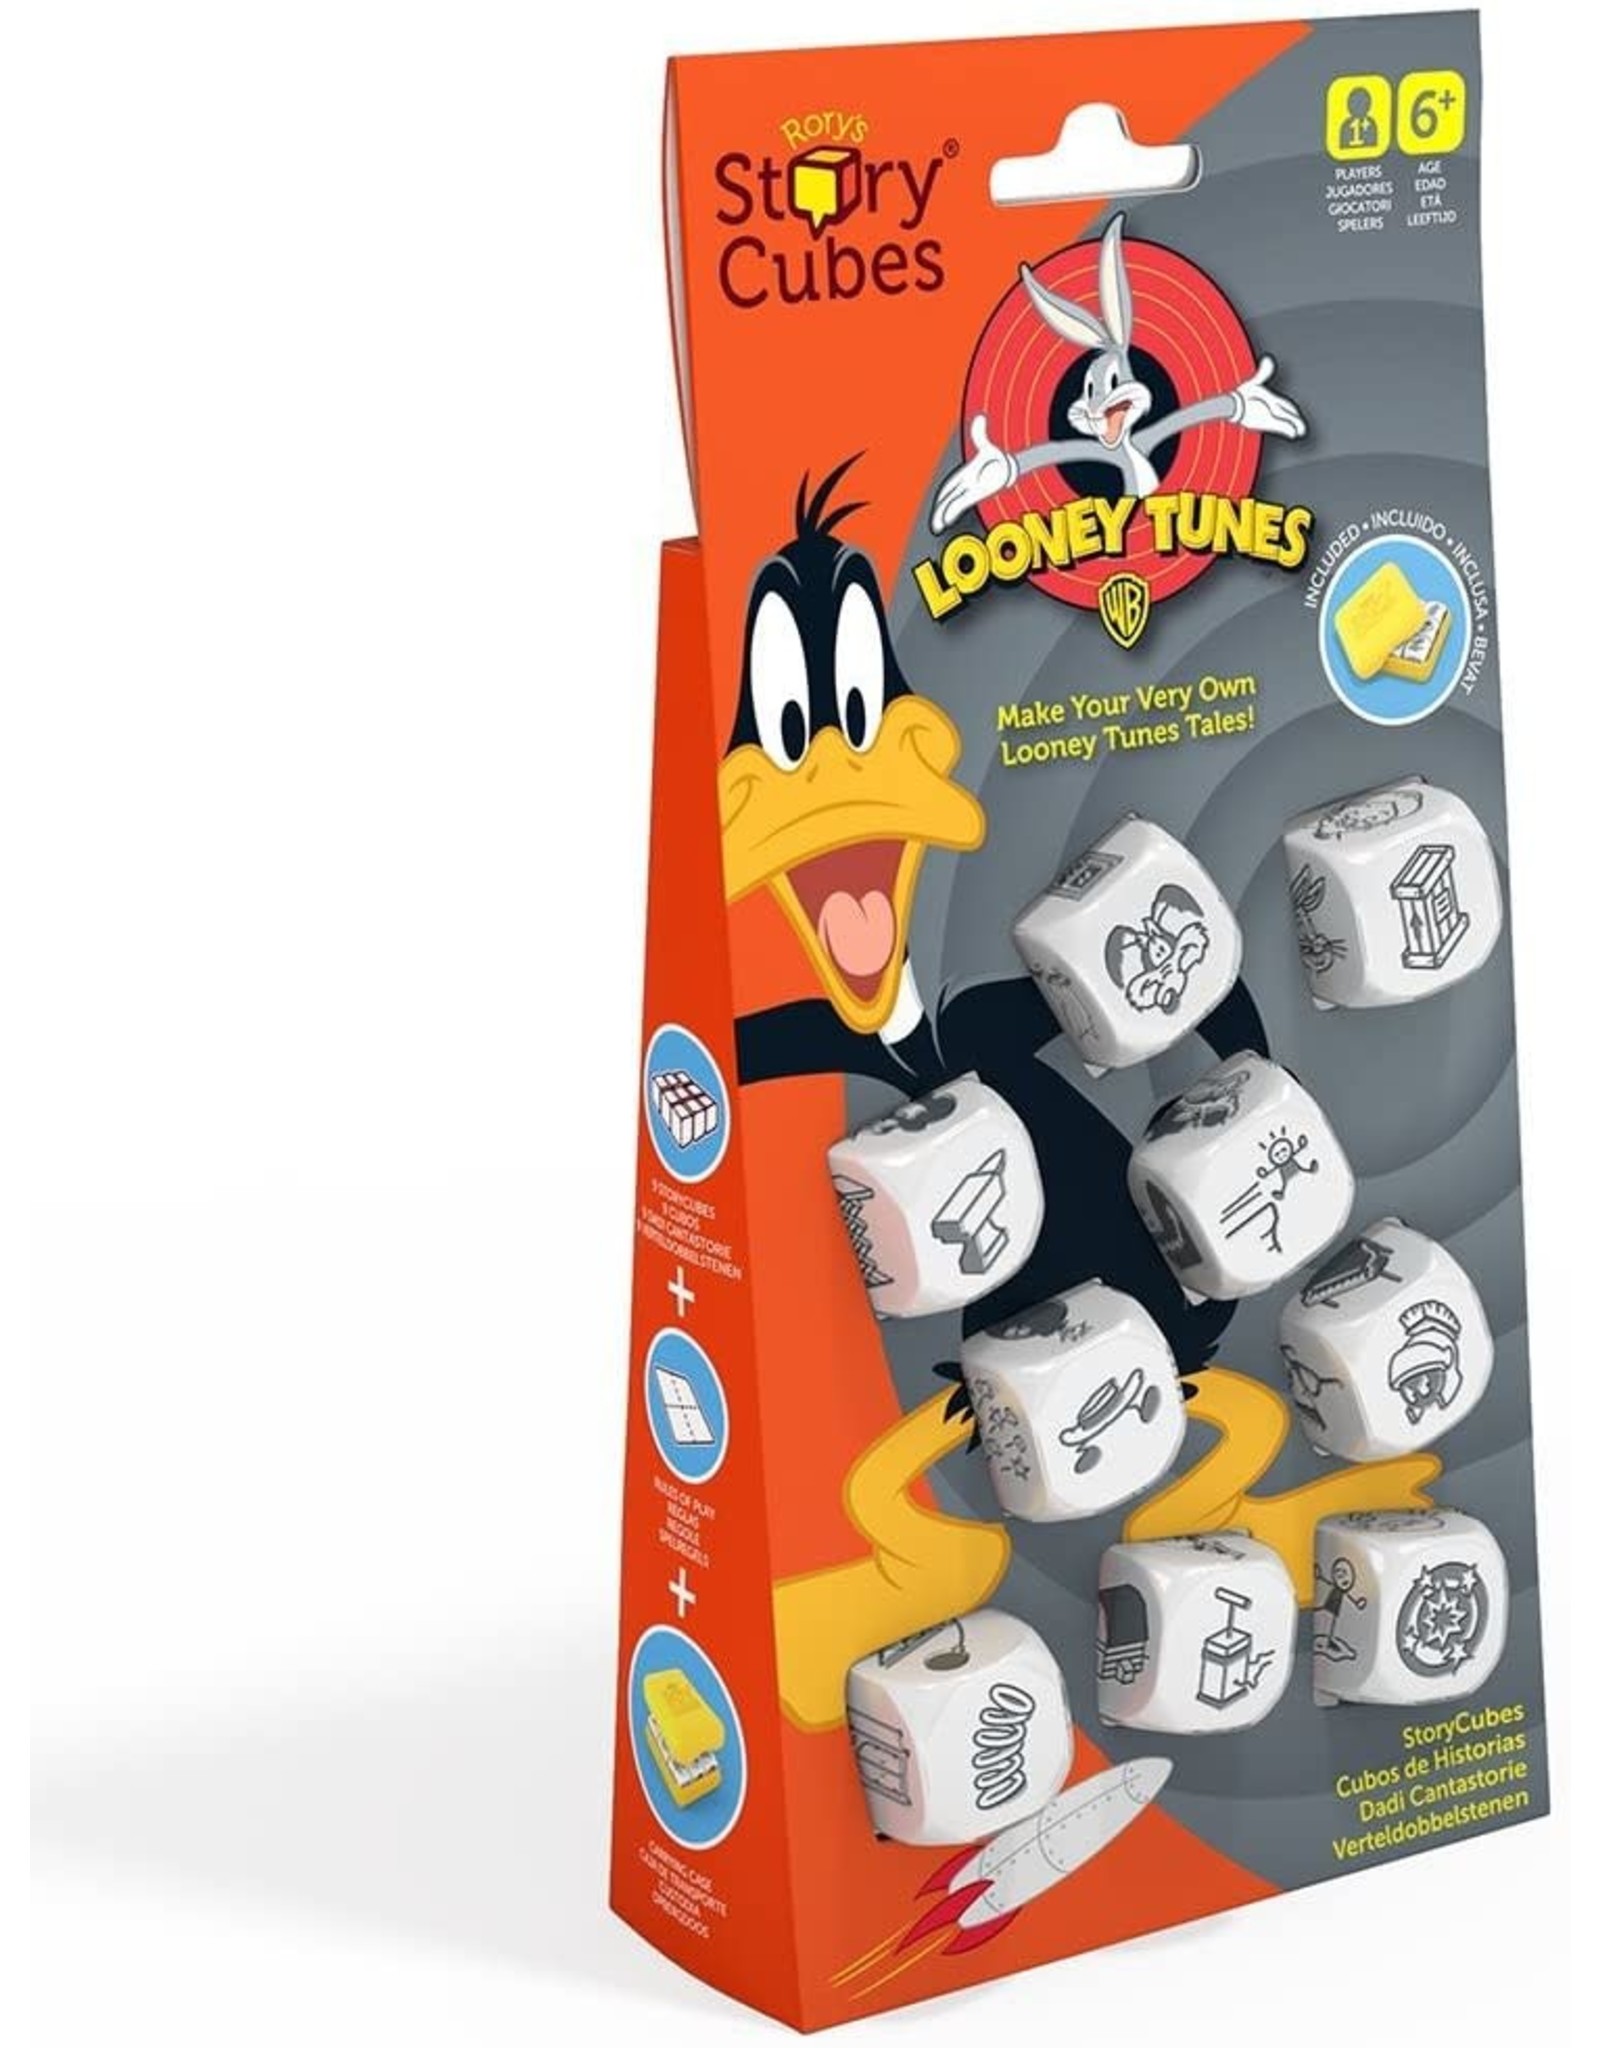 Zygo Matic Rory's Story Cubes - Looney Tunes